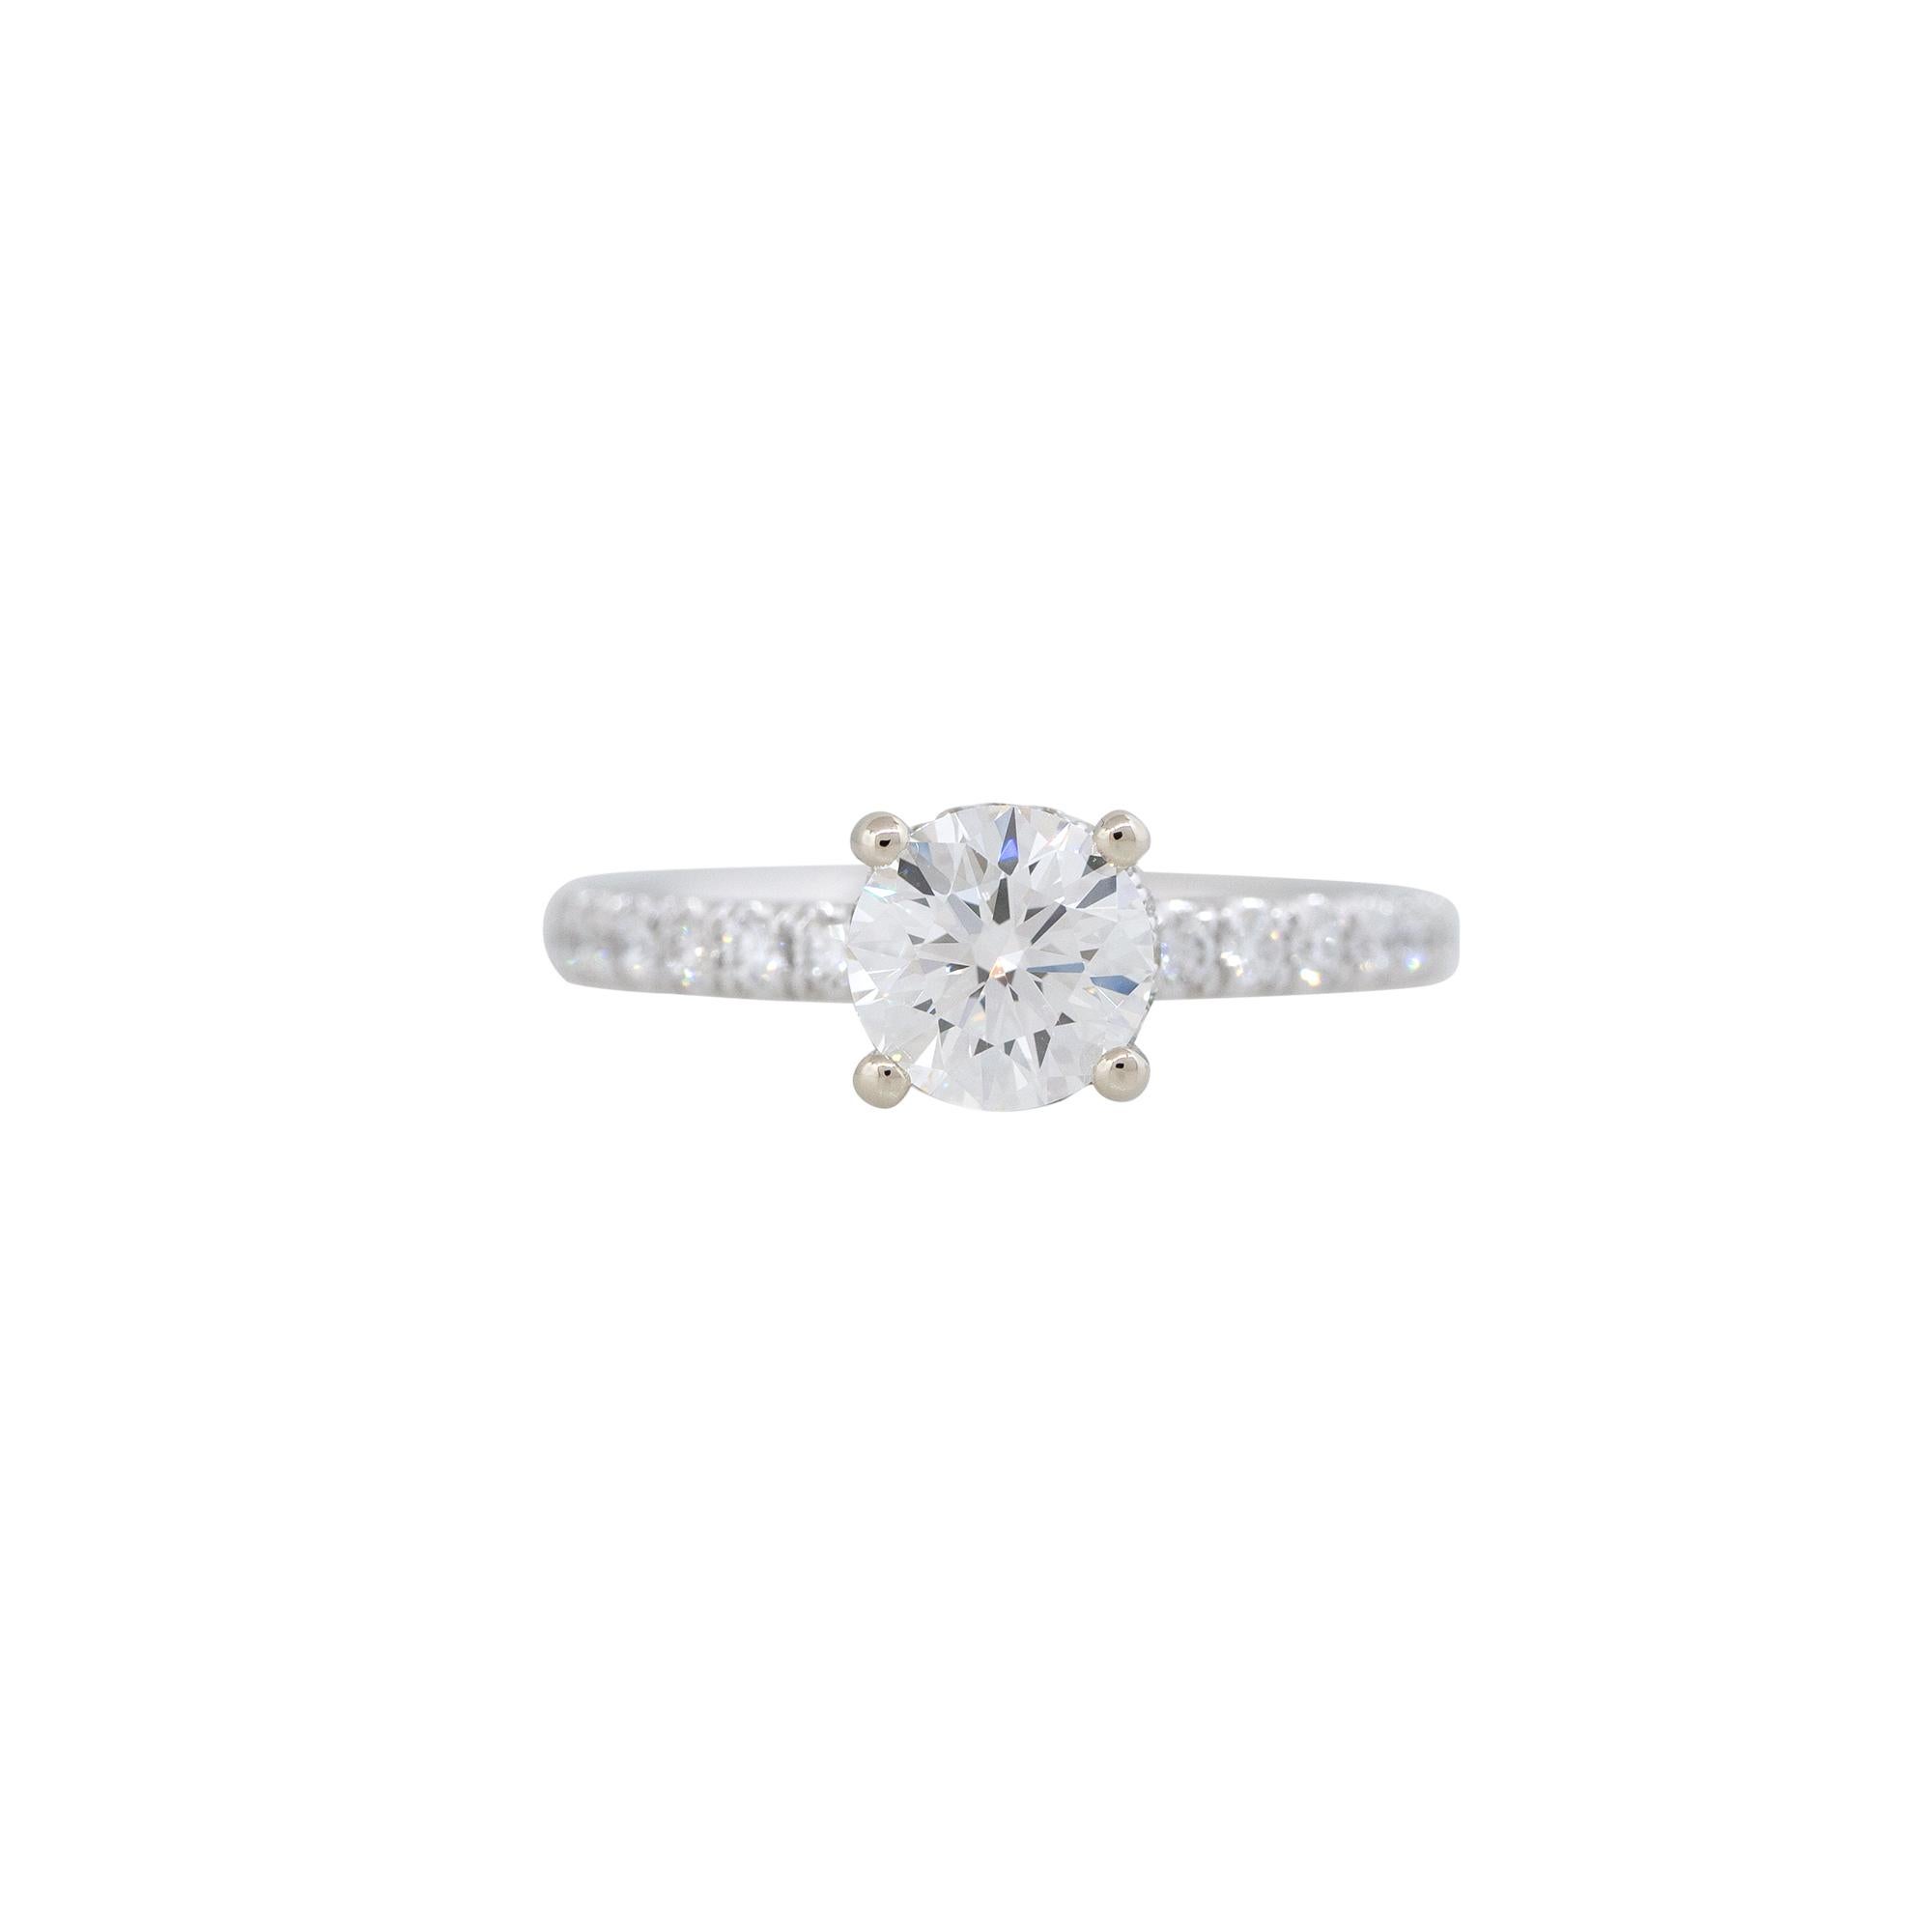 GIA Certified 1.66 Carat Round Brilliant Diamond Engagement Ring 14 Karat  In Excellent Condition For Sale In Boca Raton, FL